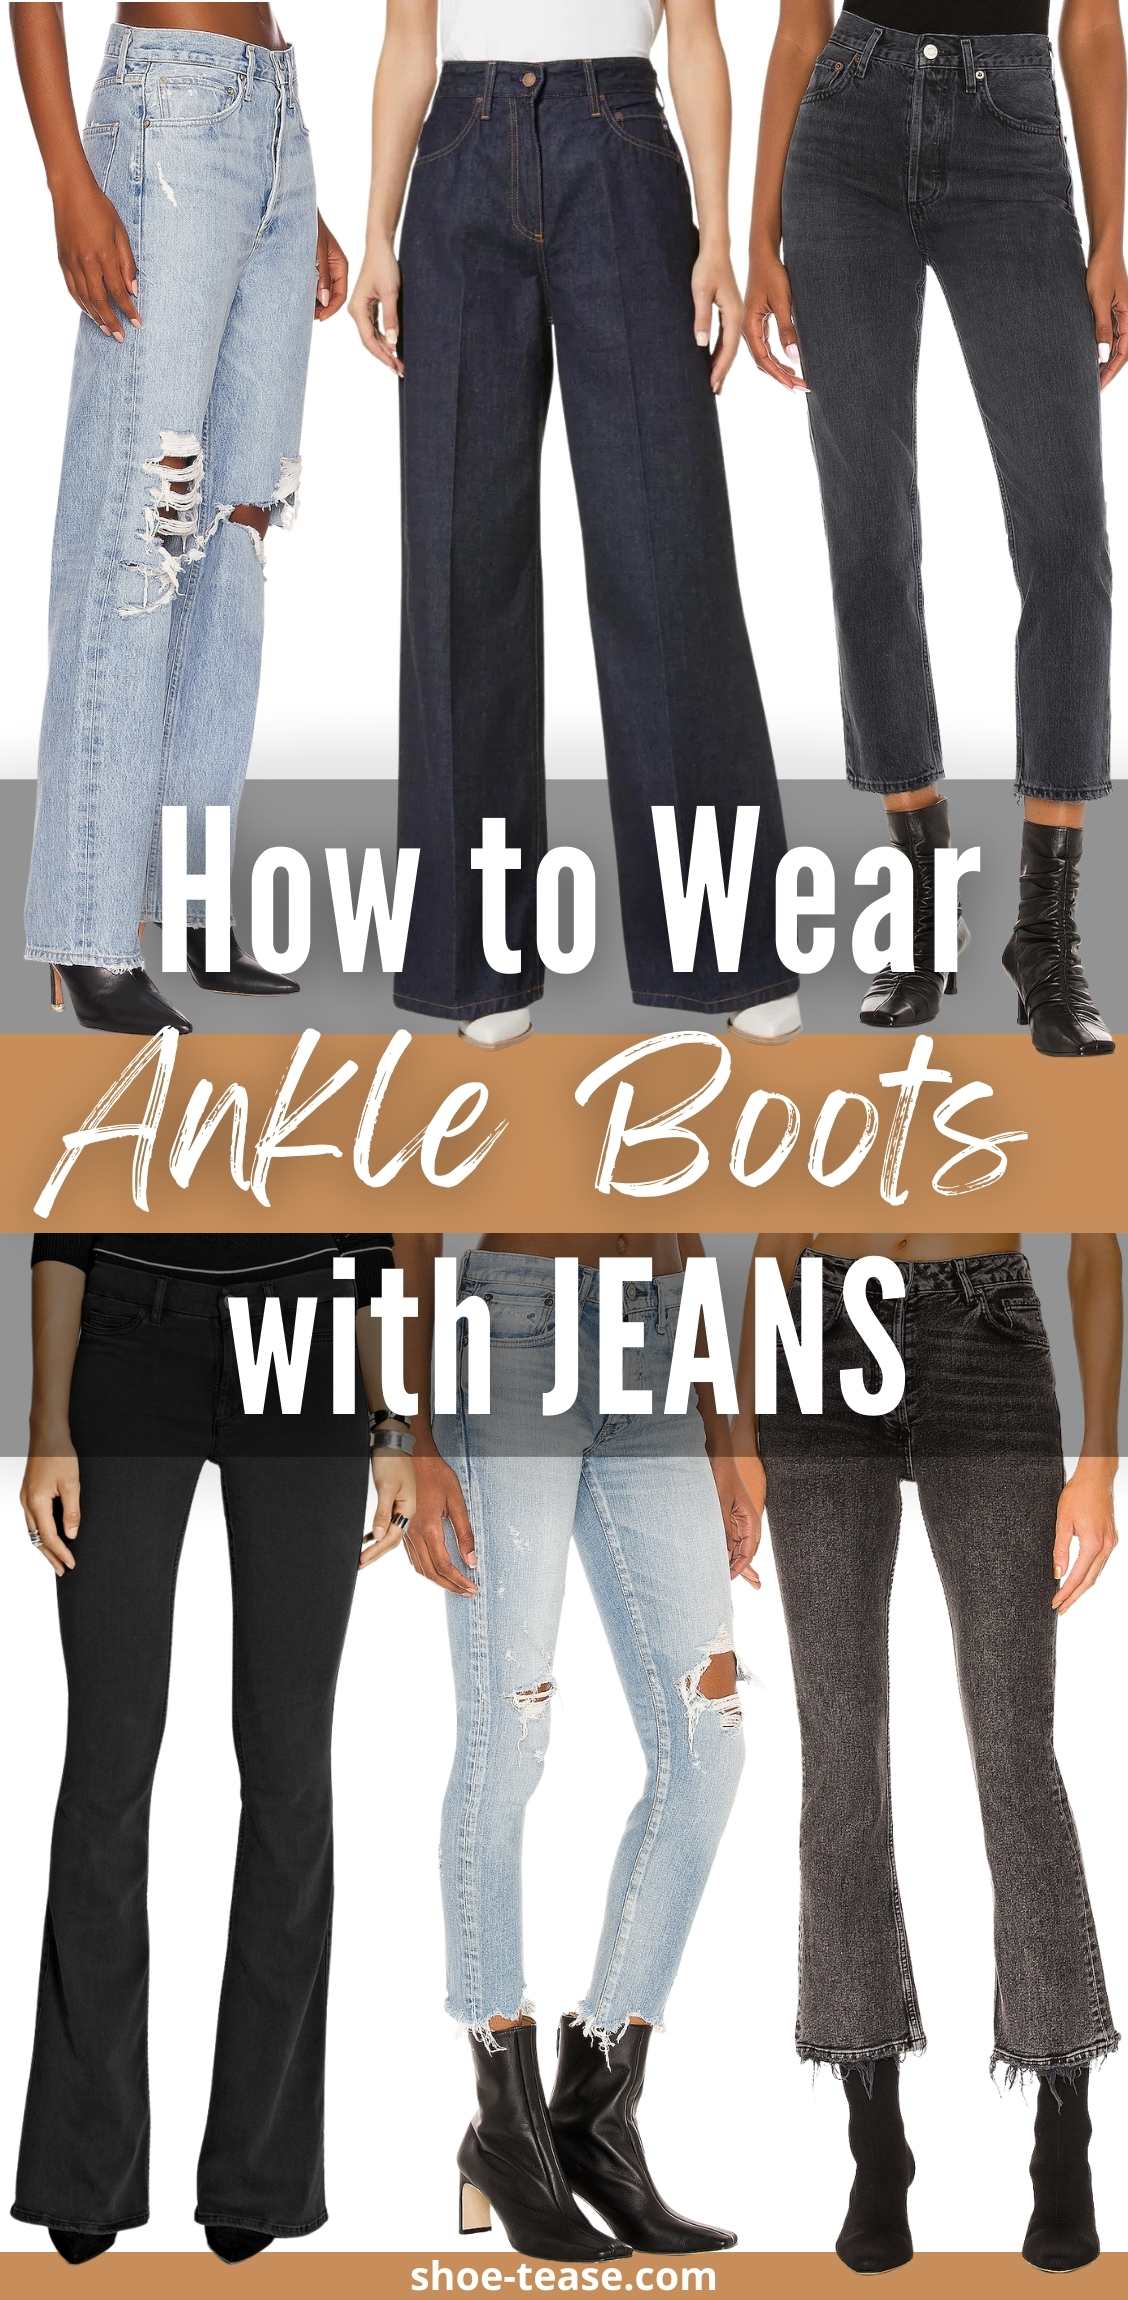 How to Wear Ankle Boots Jeans Women: Ultimate Guide